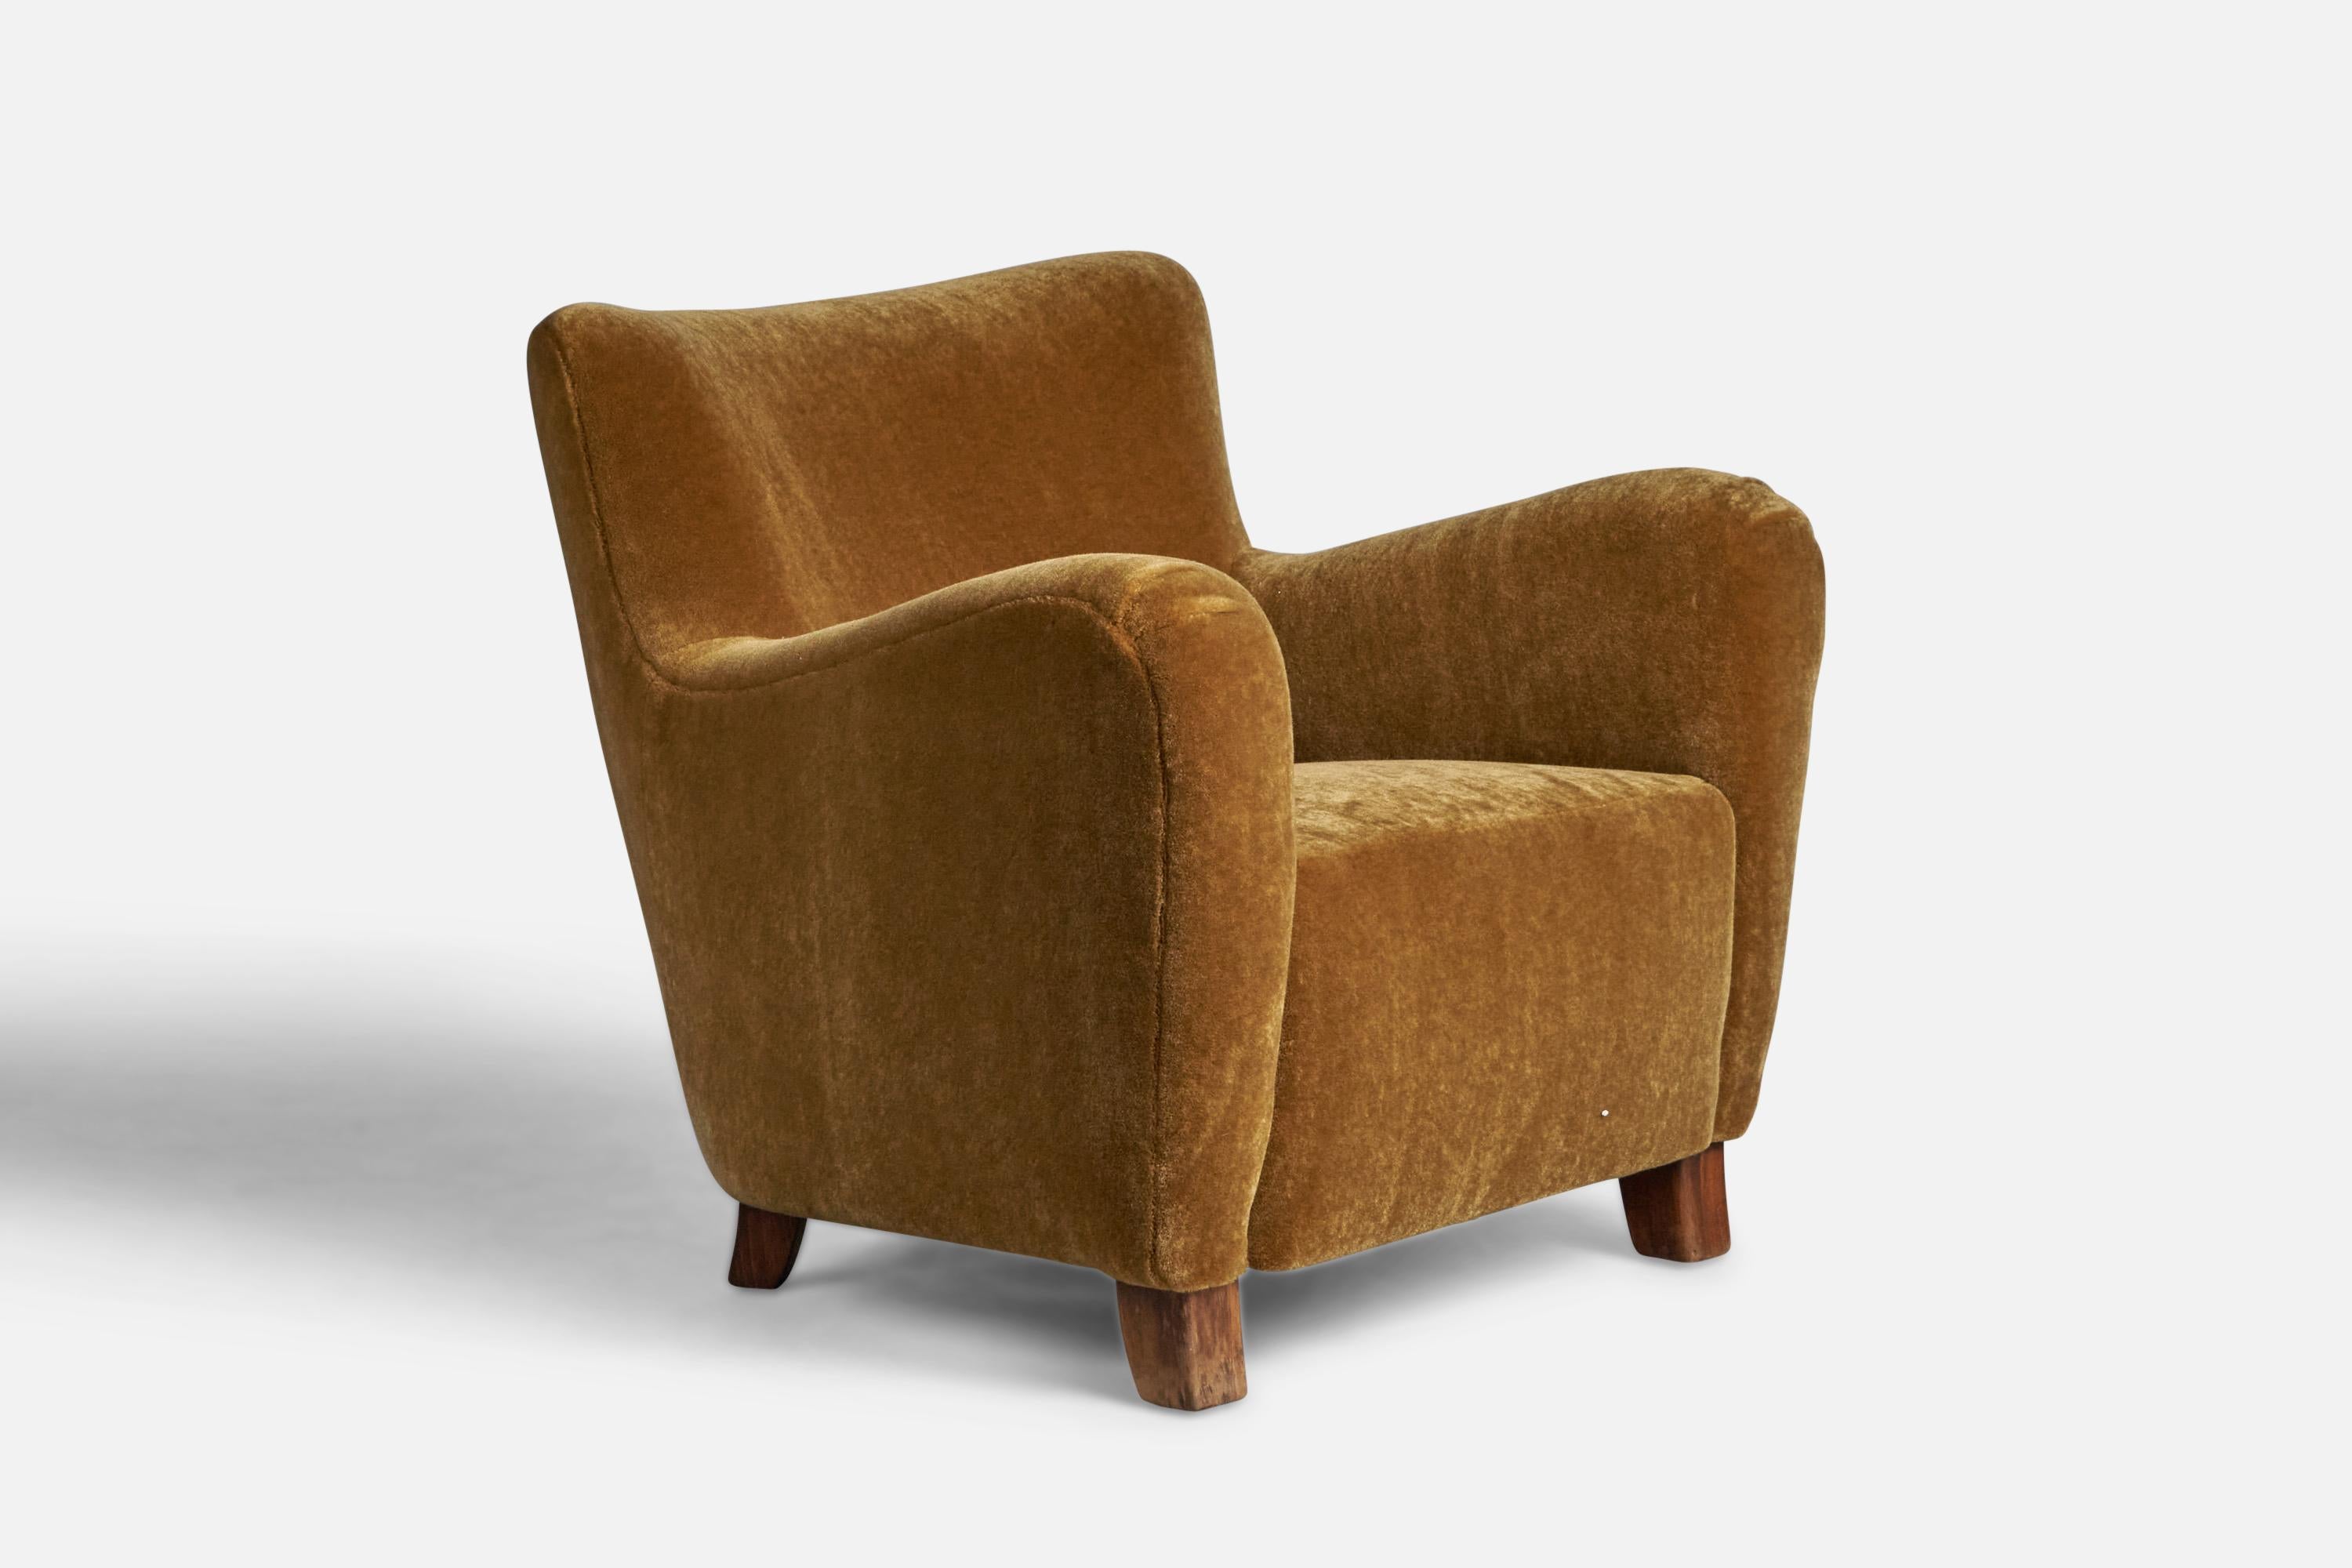 A stained wood and orange beige mohair lounge chair designed and produced in Denmark, 1940s.

16” seat height